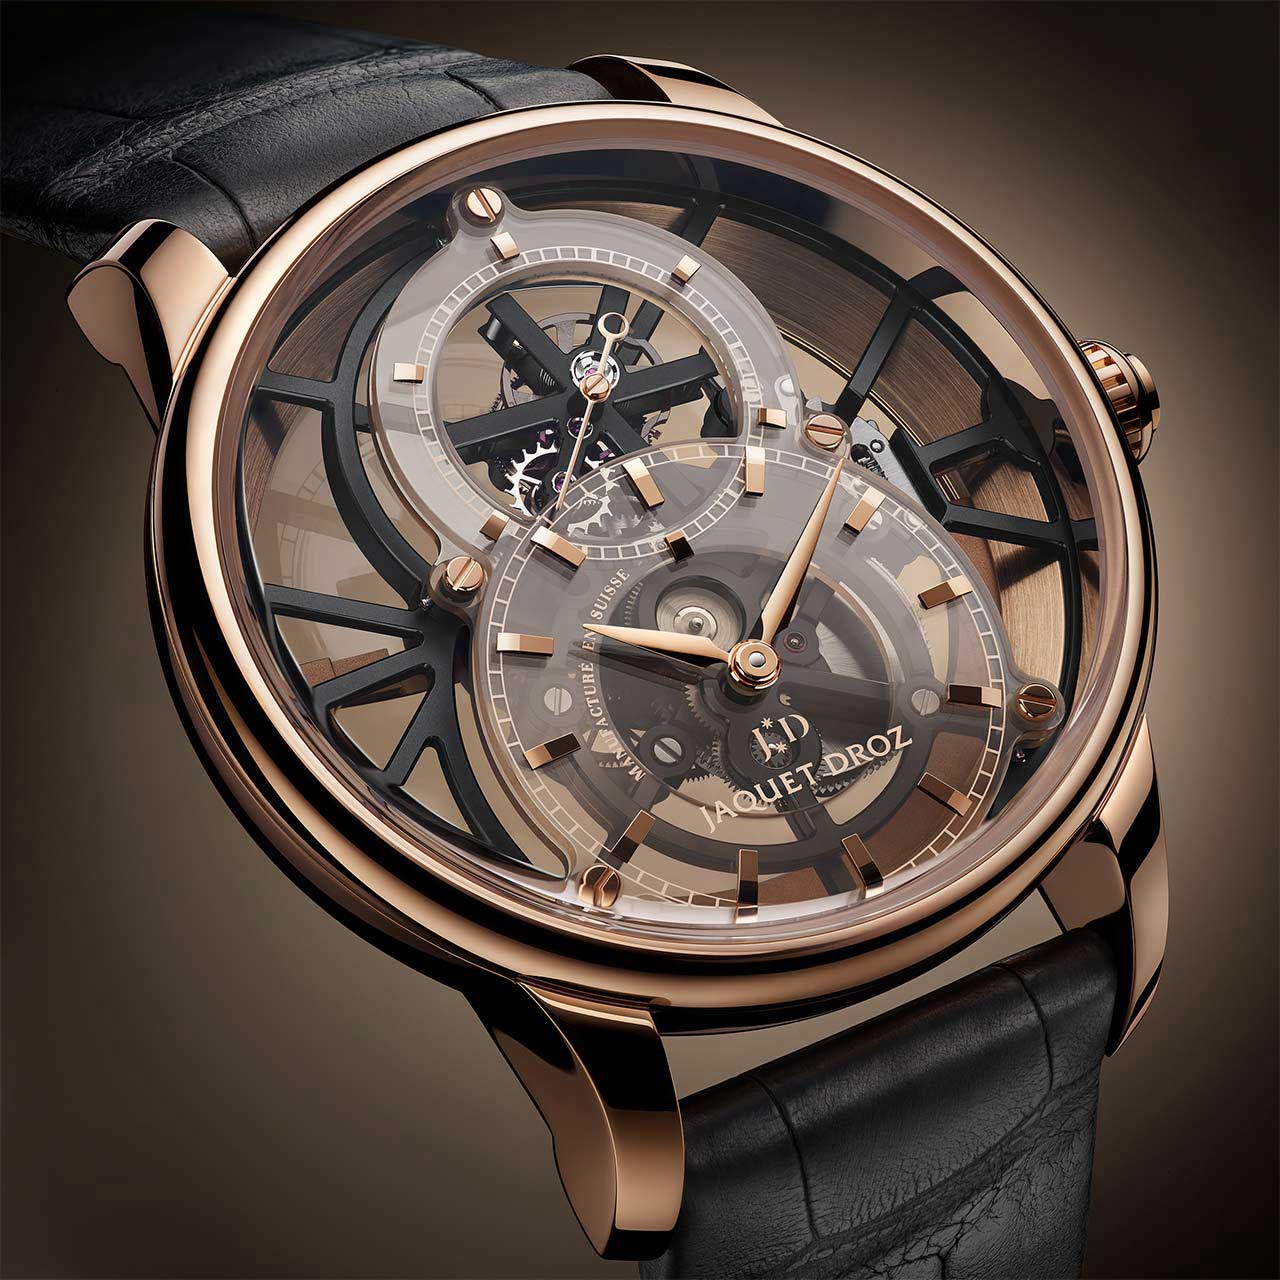 The case is 41 mm in red gold and has been engineered to allow the opening a maximum of space